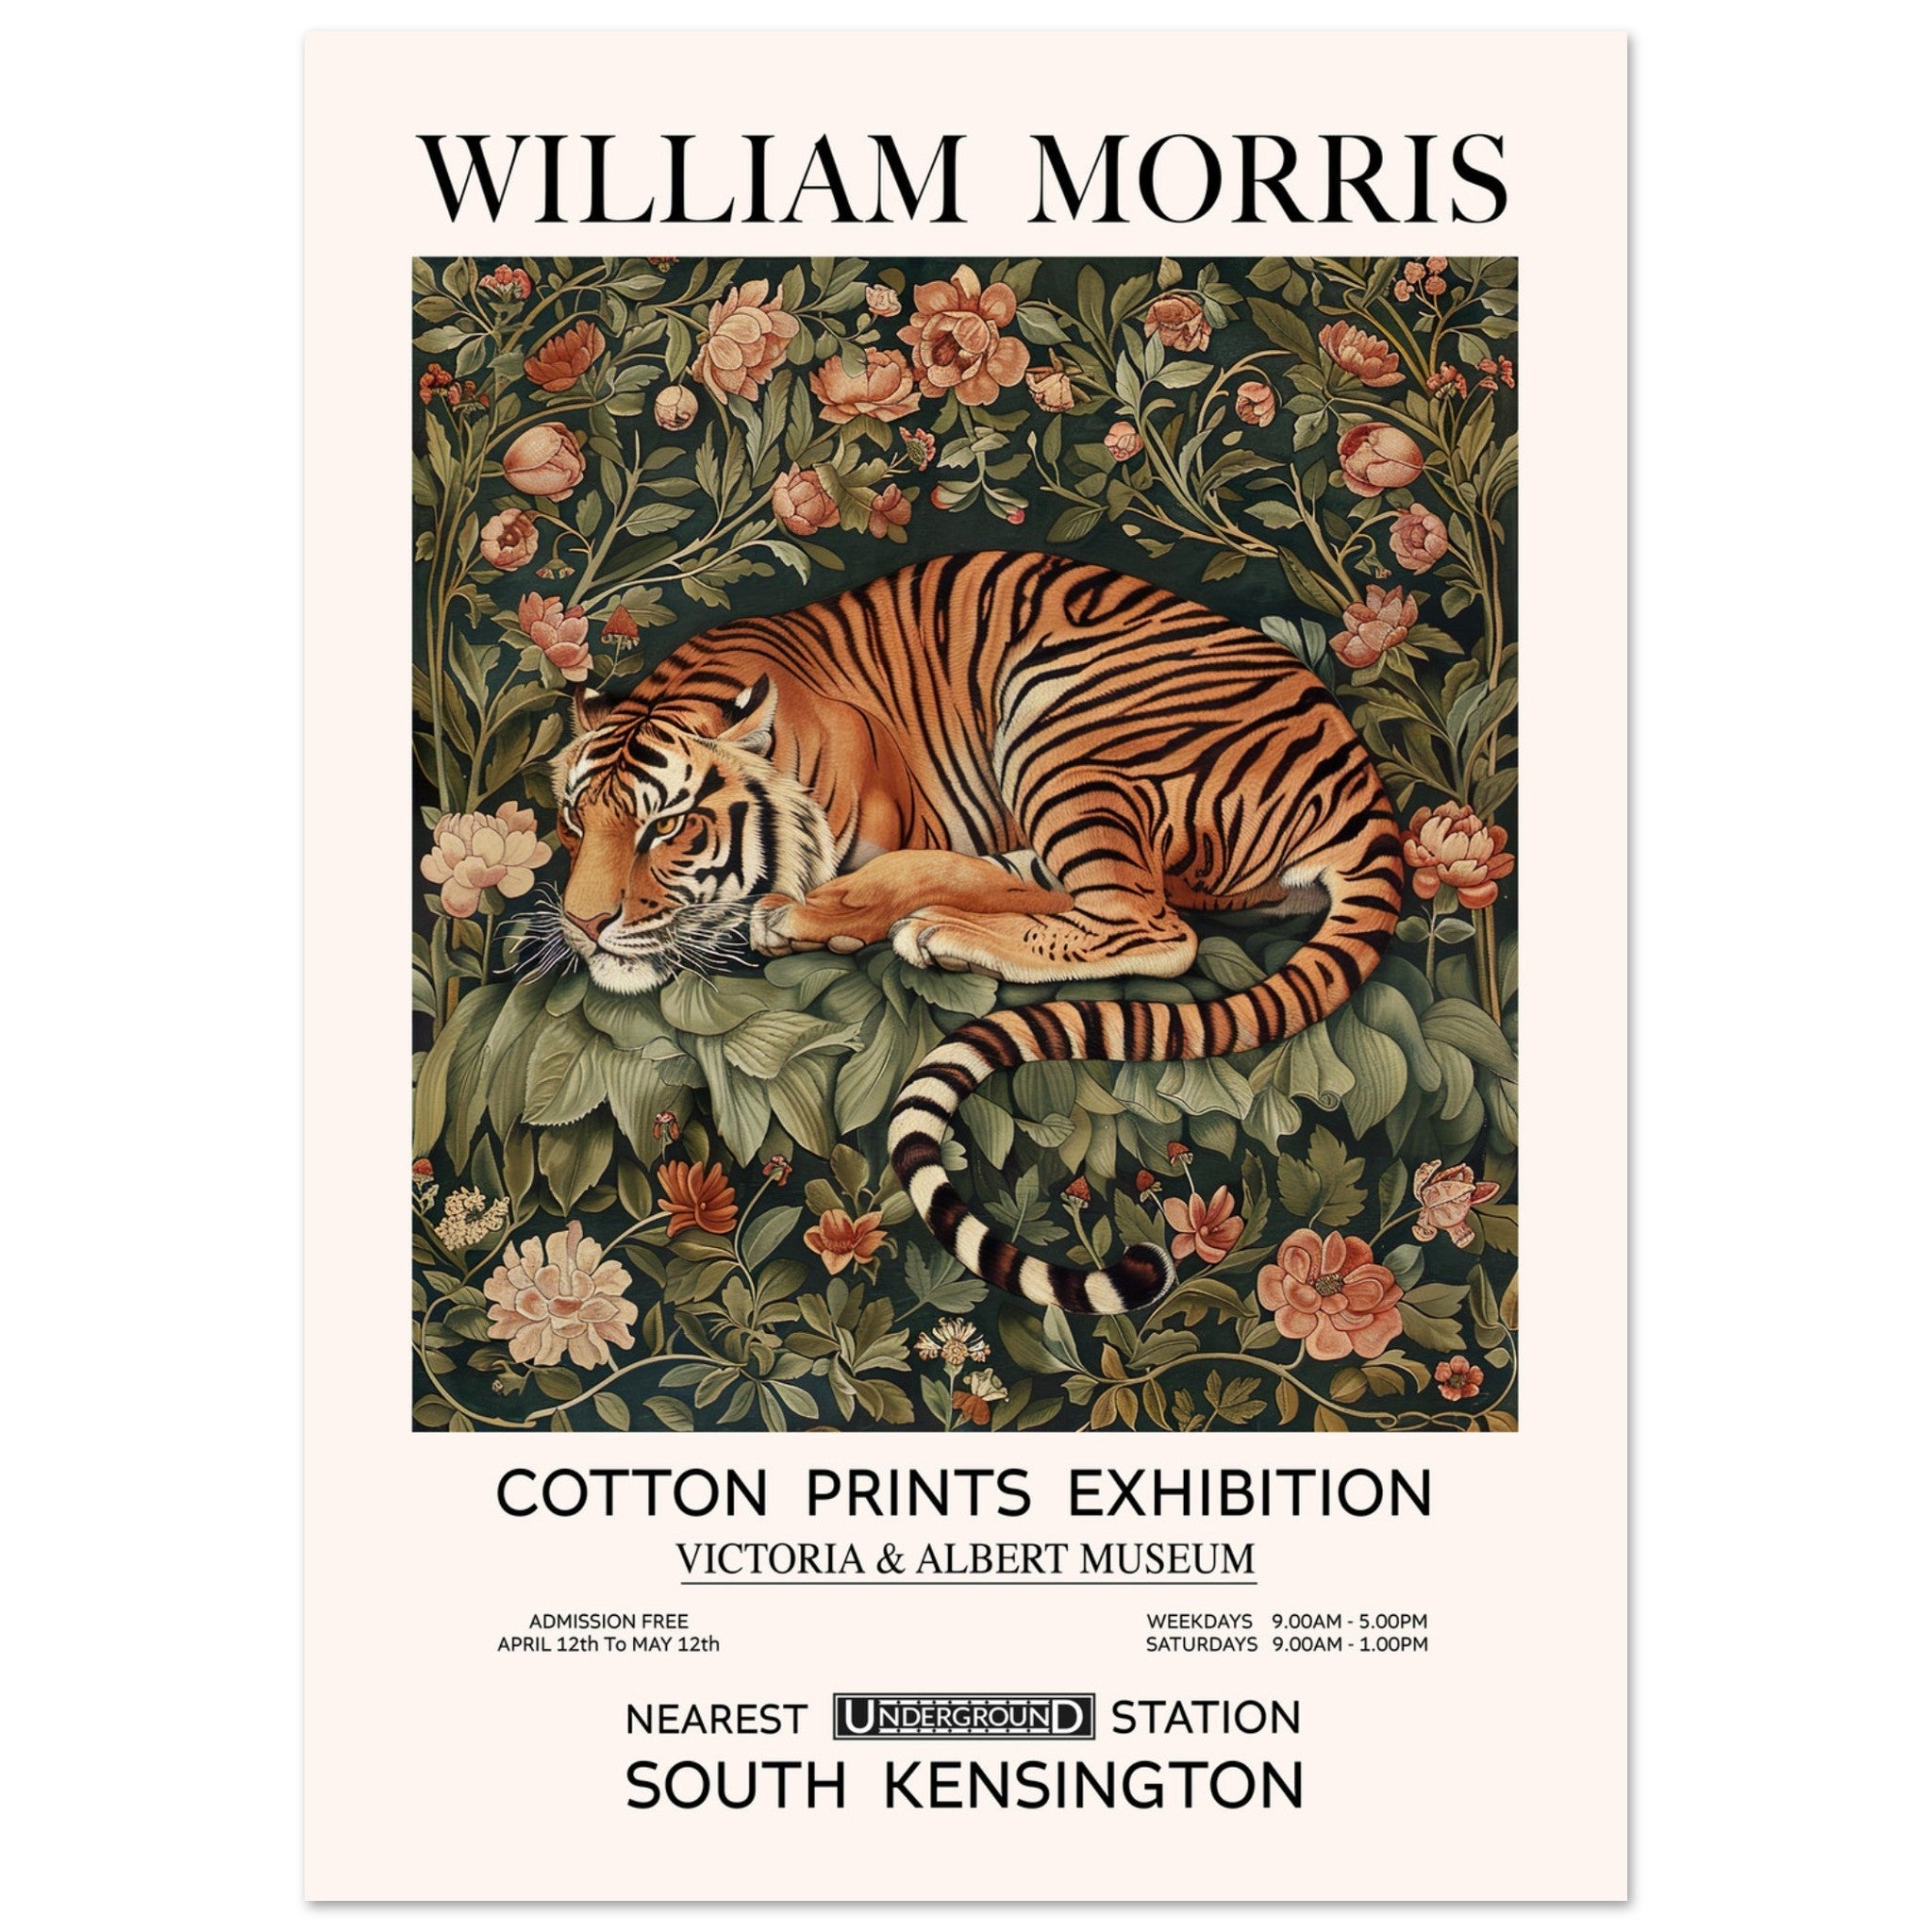 The Tiger in Flowers - William Morris, The Tiger in Flowers, Vintage Art print, William Morris Art, #illieeart